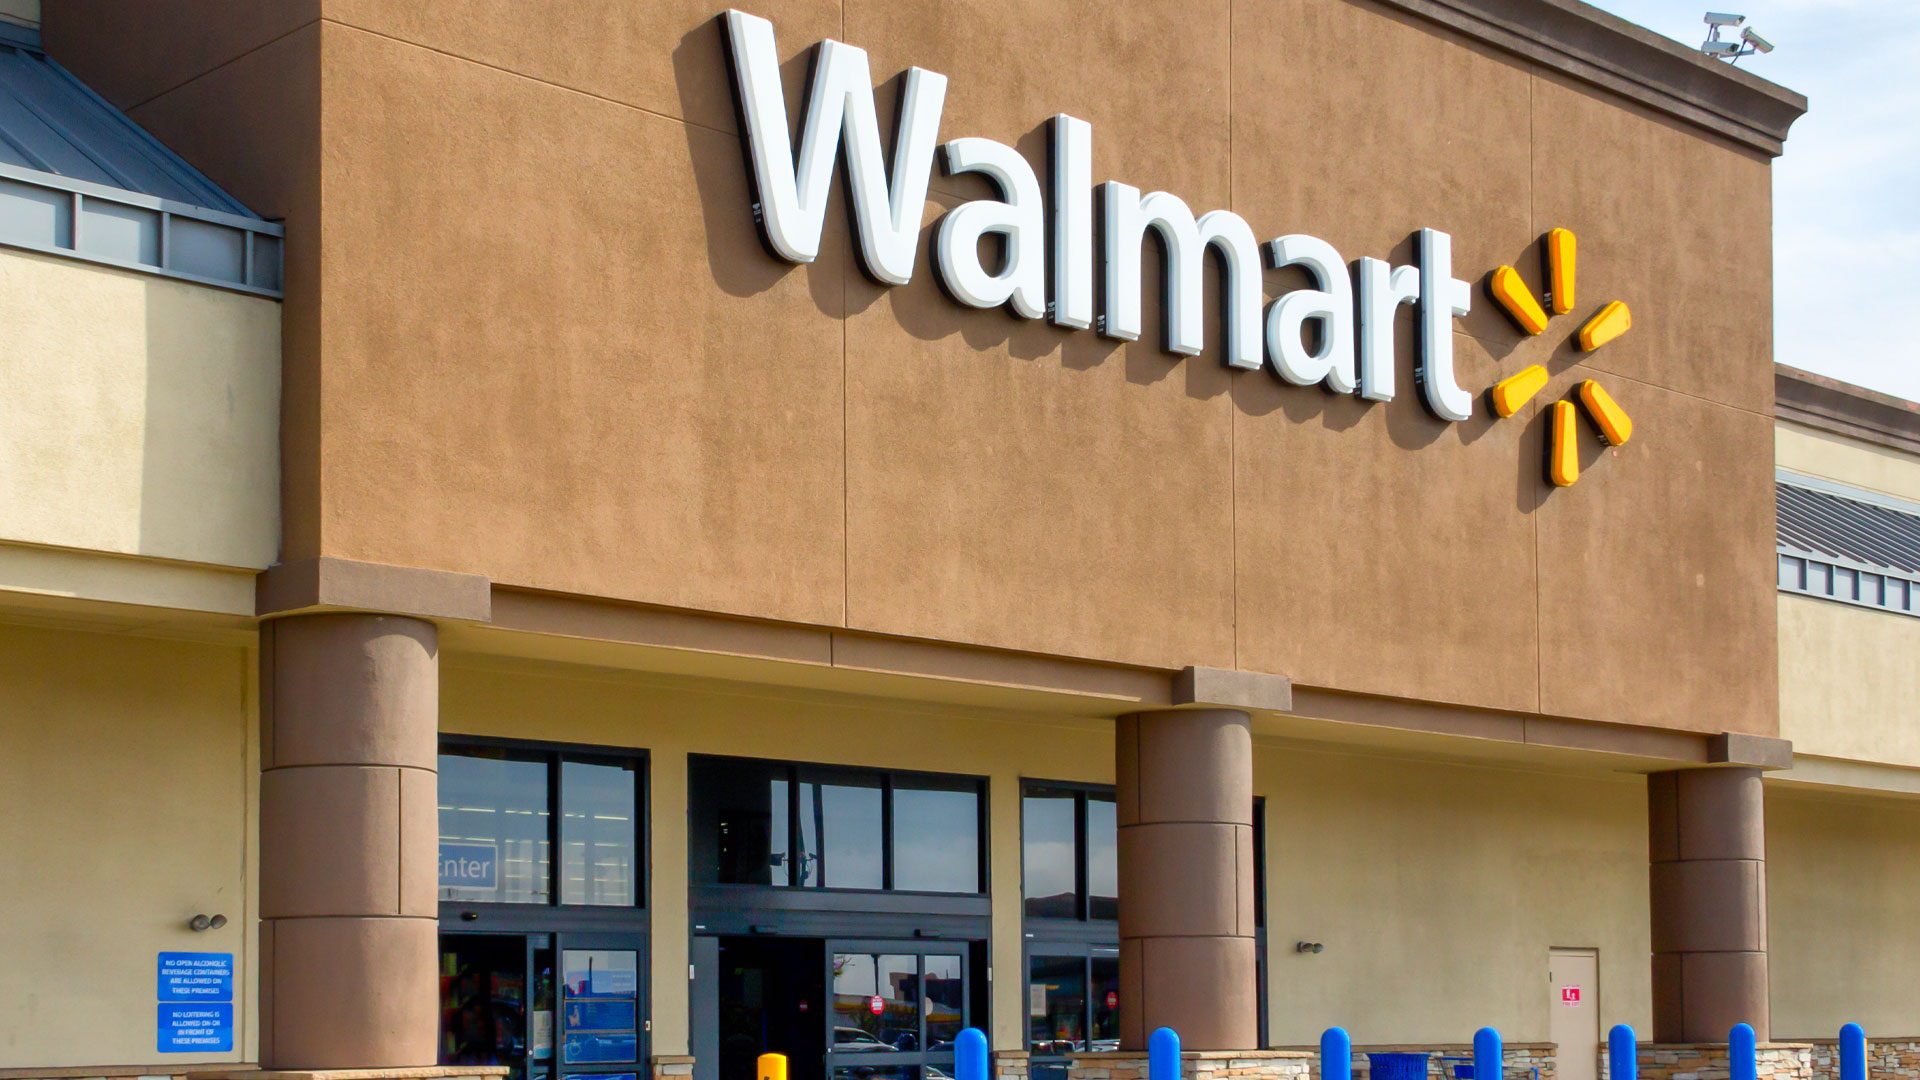 Walmart sends an urgent warning about a scam that targets loyal customers in the mail